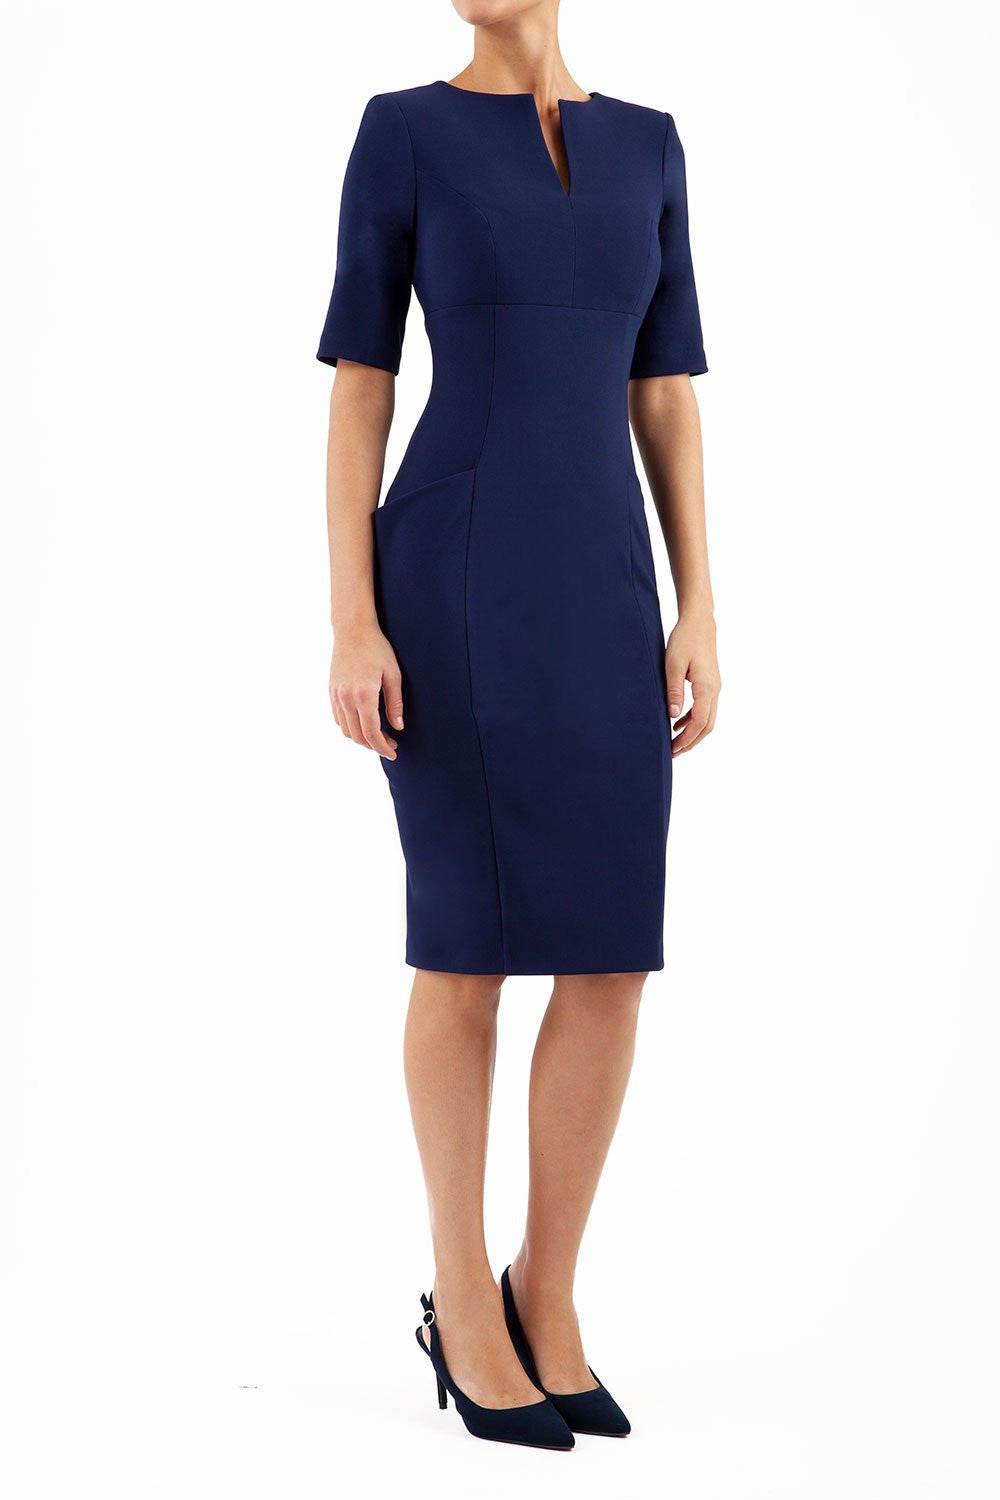 Model wearing Diva catwalk Derwent Pencil skirt dress with shoulder pads and short sleeves and pockets on both sides and empire waistline in navy blue front